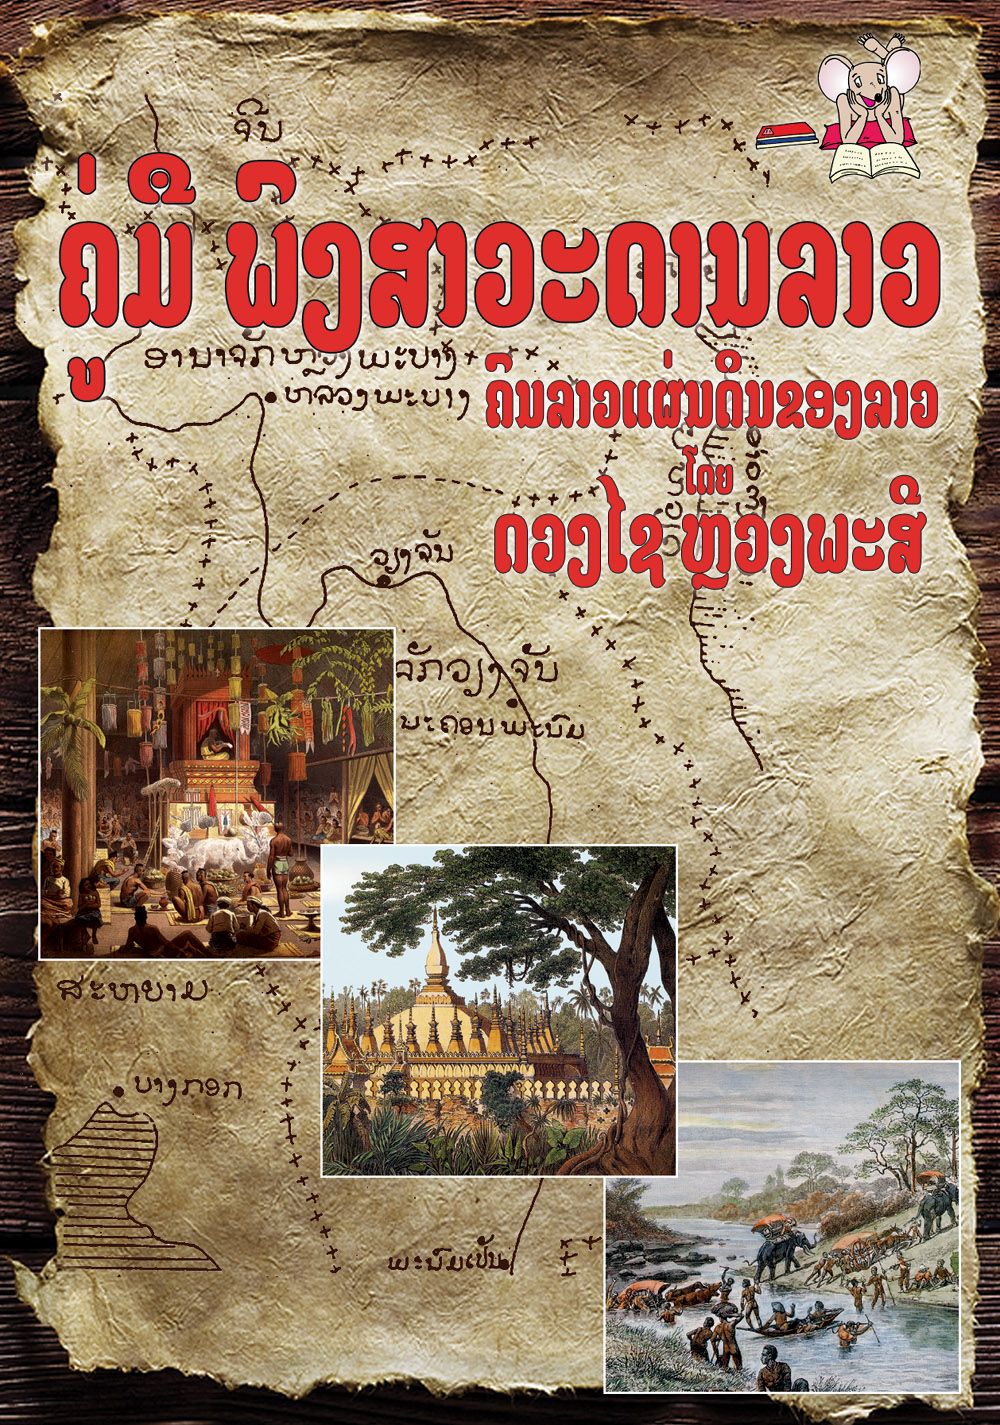 The Land of Laos large book cover, published in Lao language